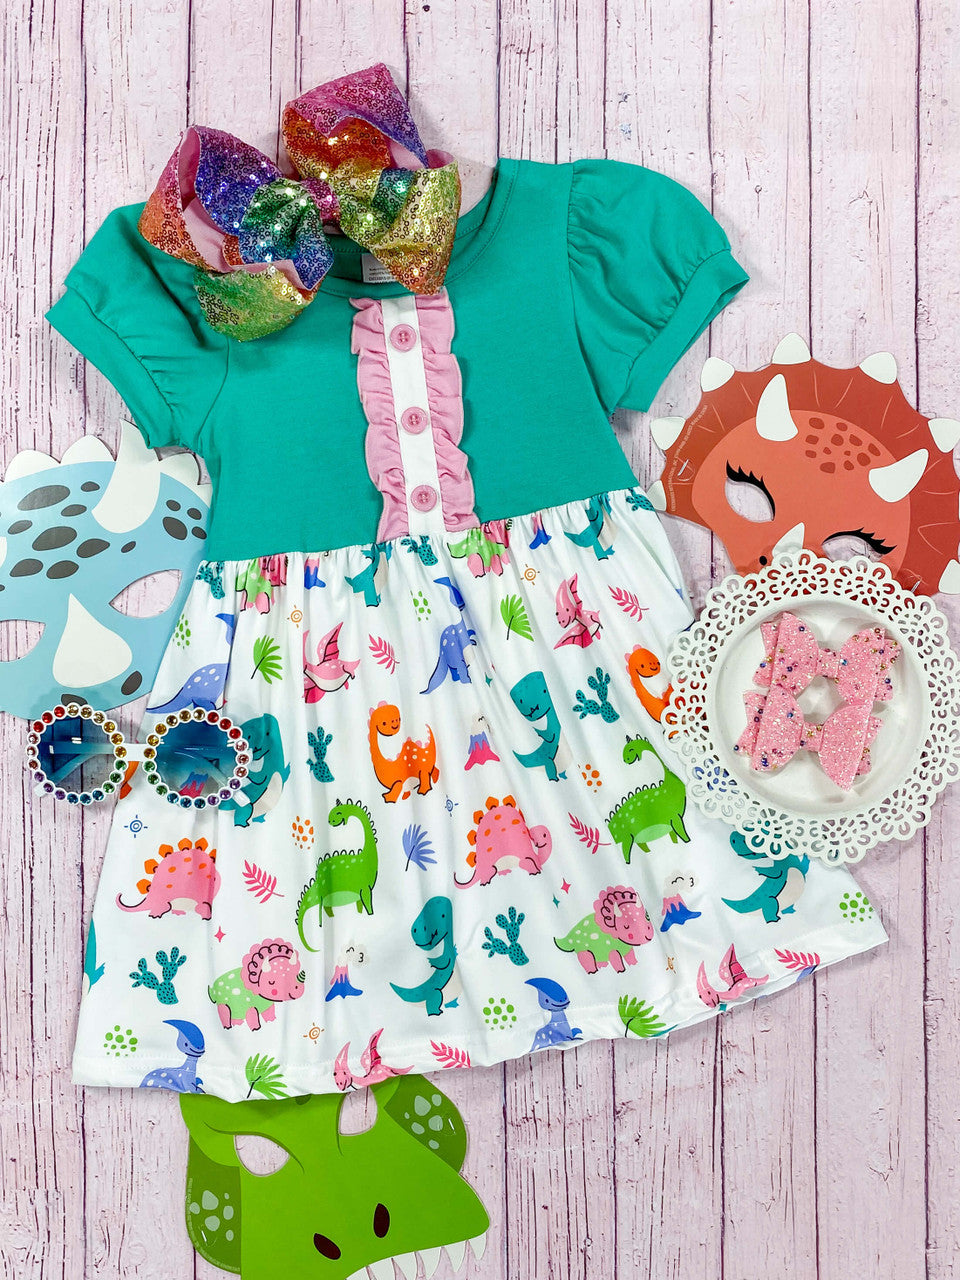 Teal top with pink center ruffle and Dino print bottom dress